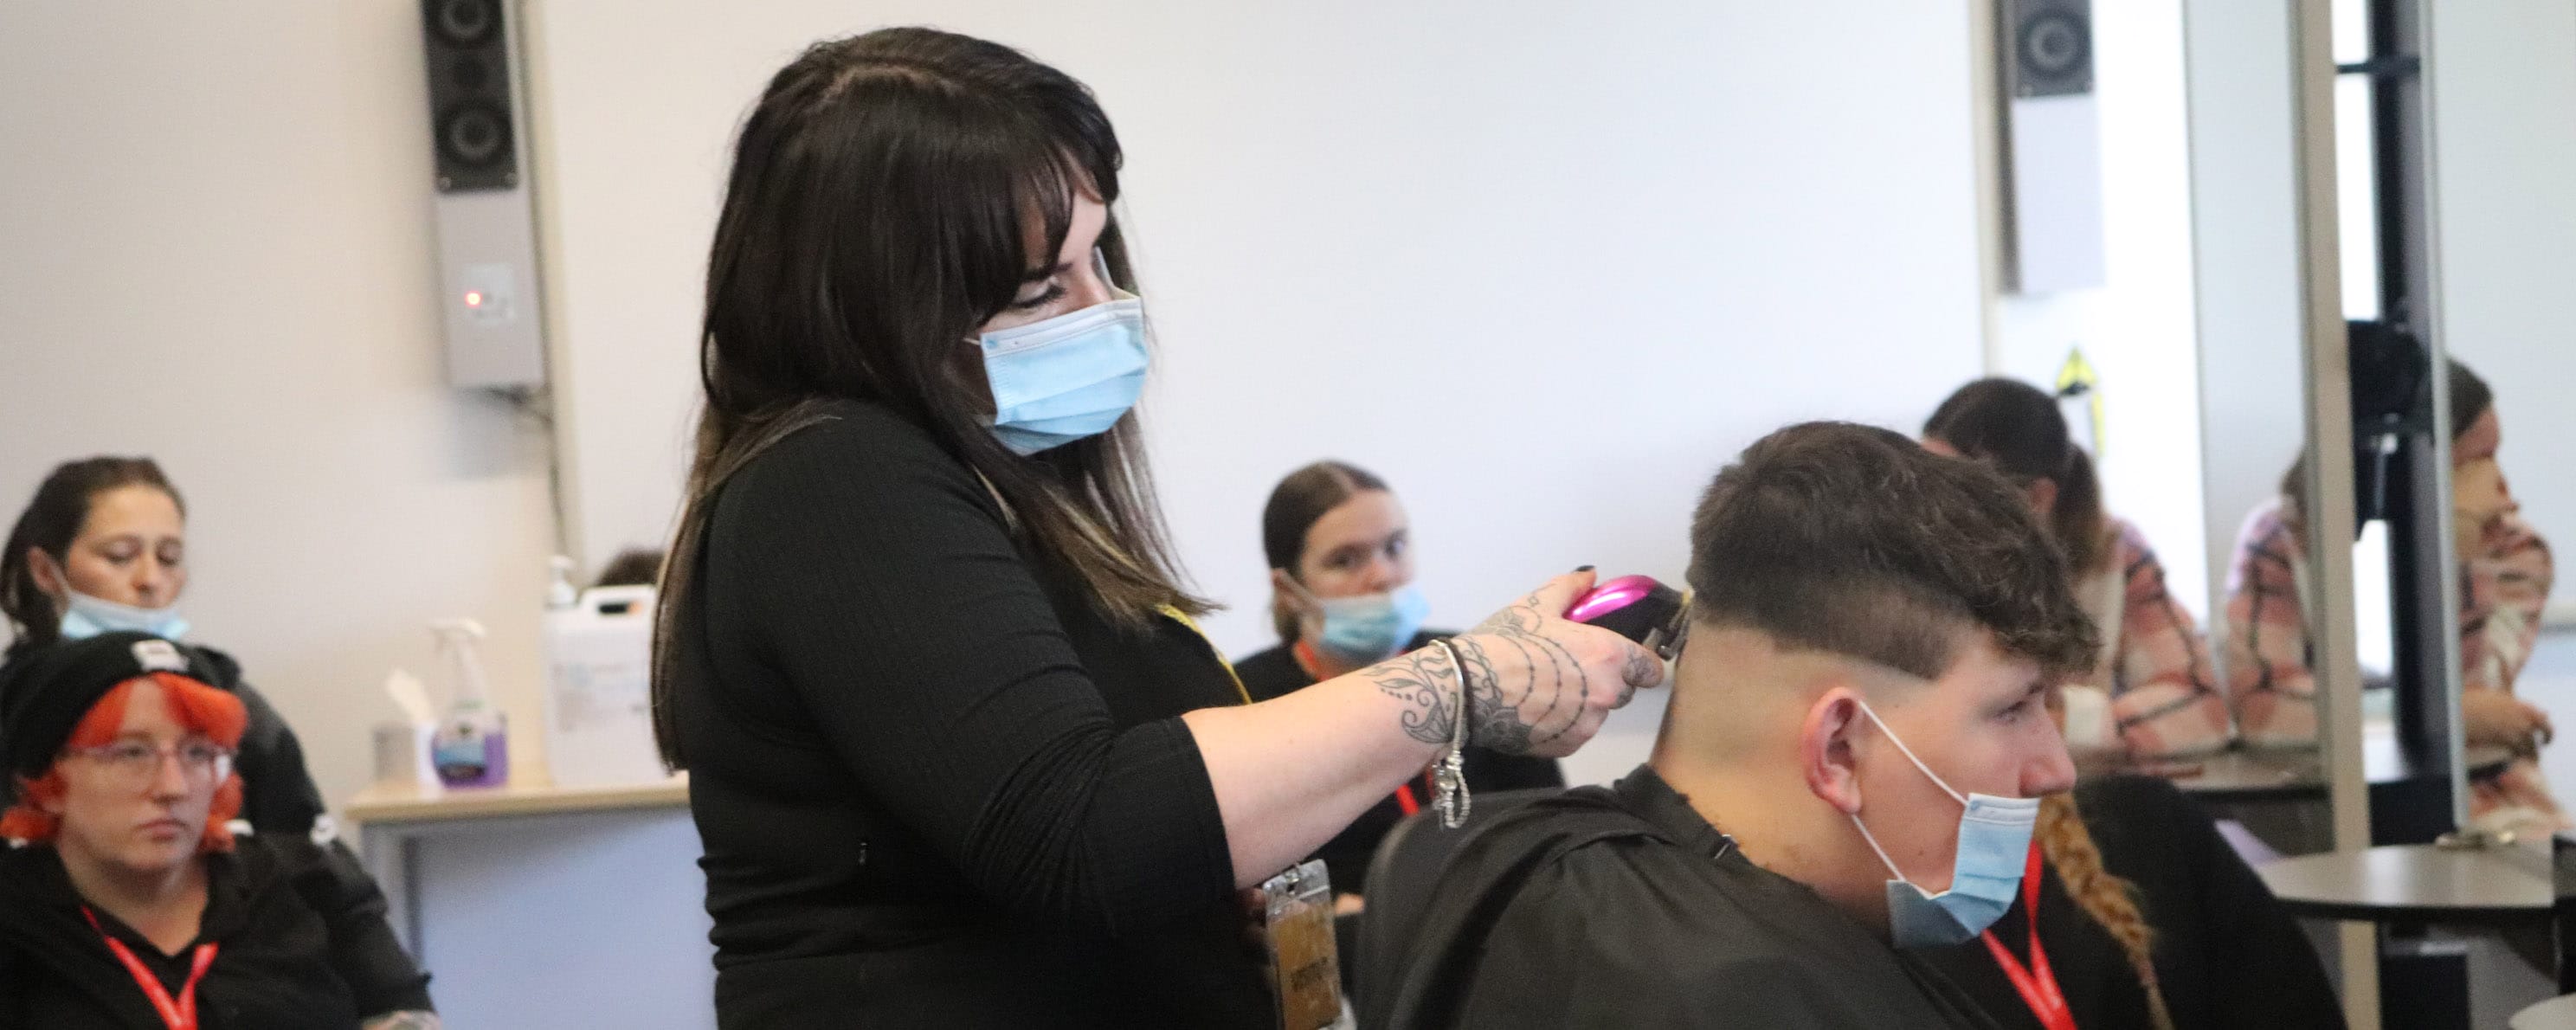 guest employer demonstrates barbering techniques on model watched by students